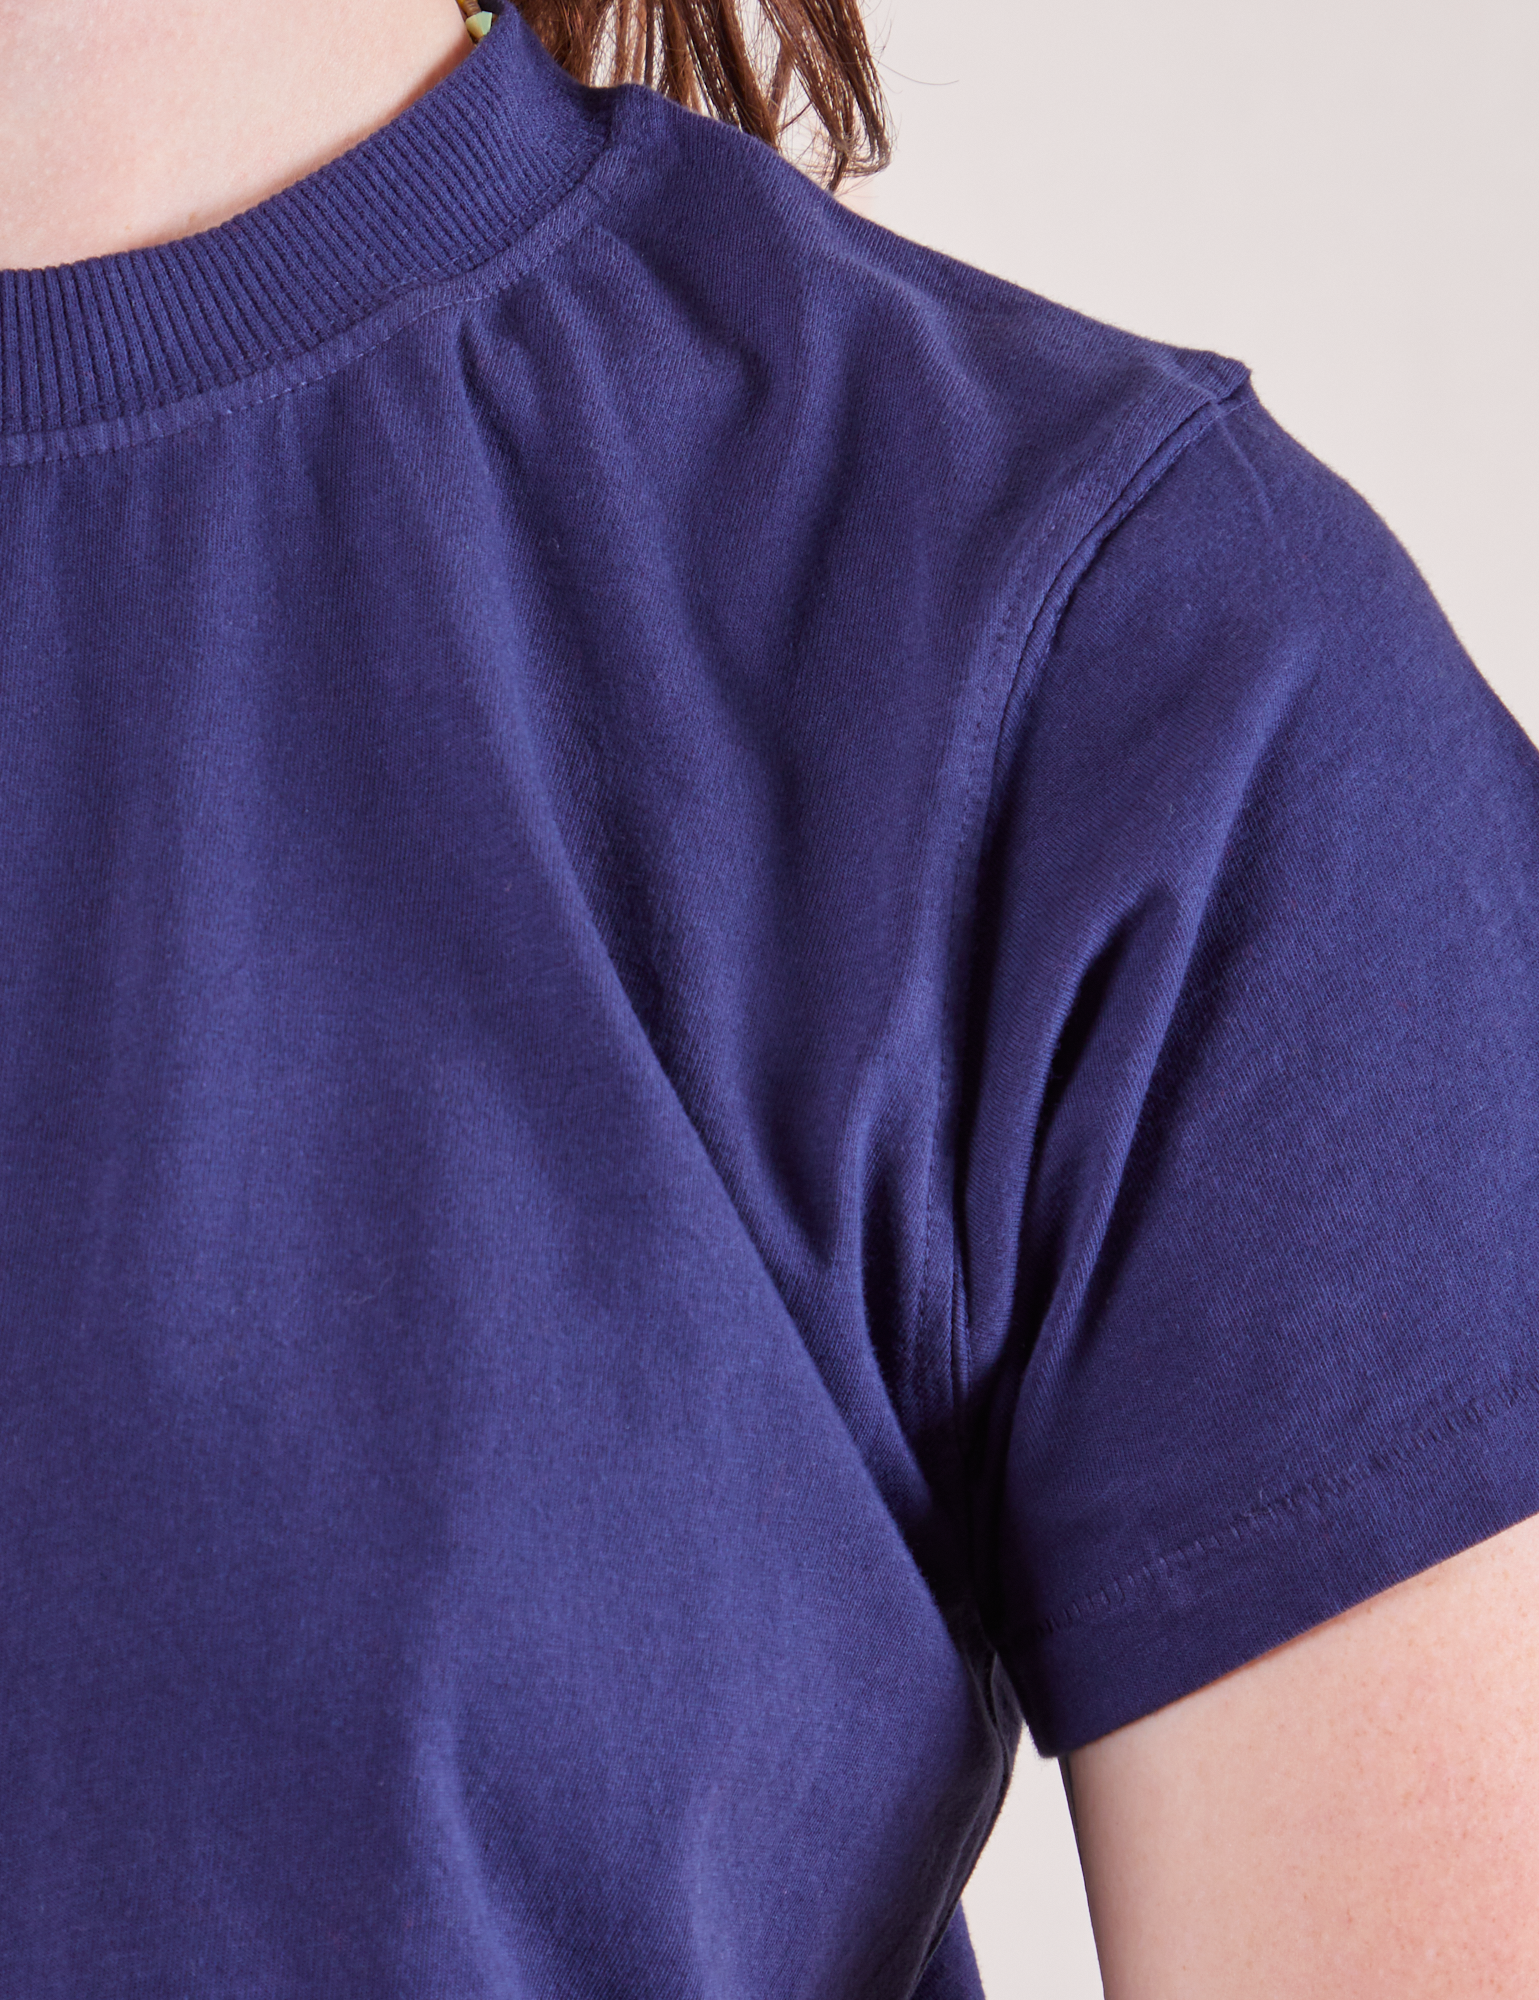 The Organic Vintage Tee in Navy Blue front close up on Alex